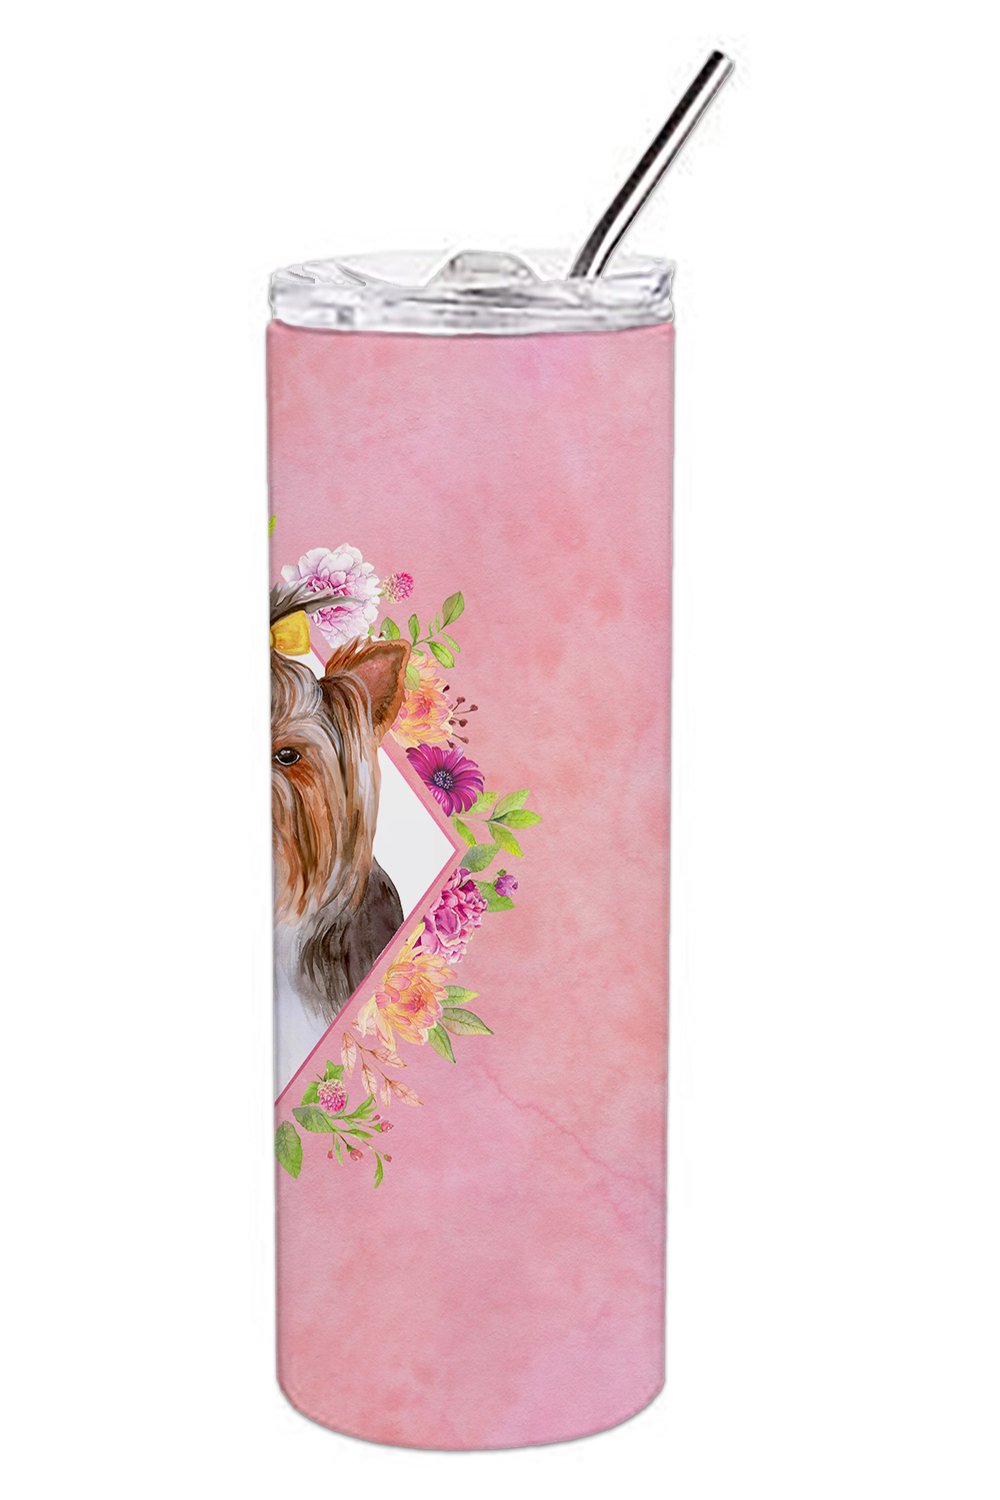 Yorkshire Terrier #1 Pink Flowers Double Walled Stainless Steel 20 oz Skinny Tumbler CK4194TBL20 by Caroline's Treasures